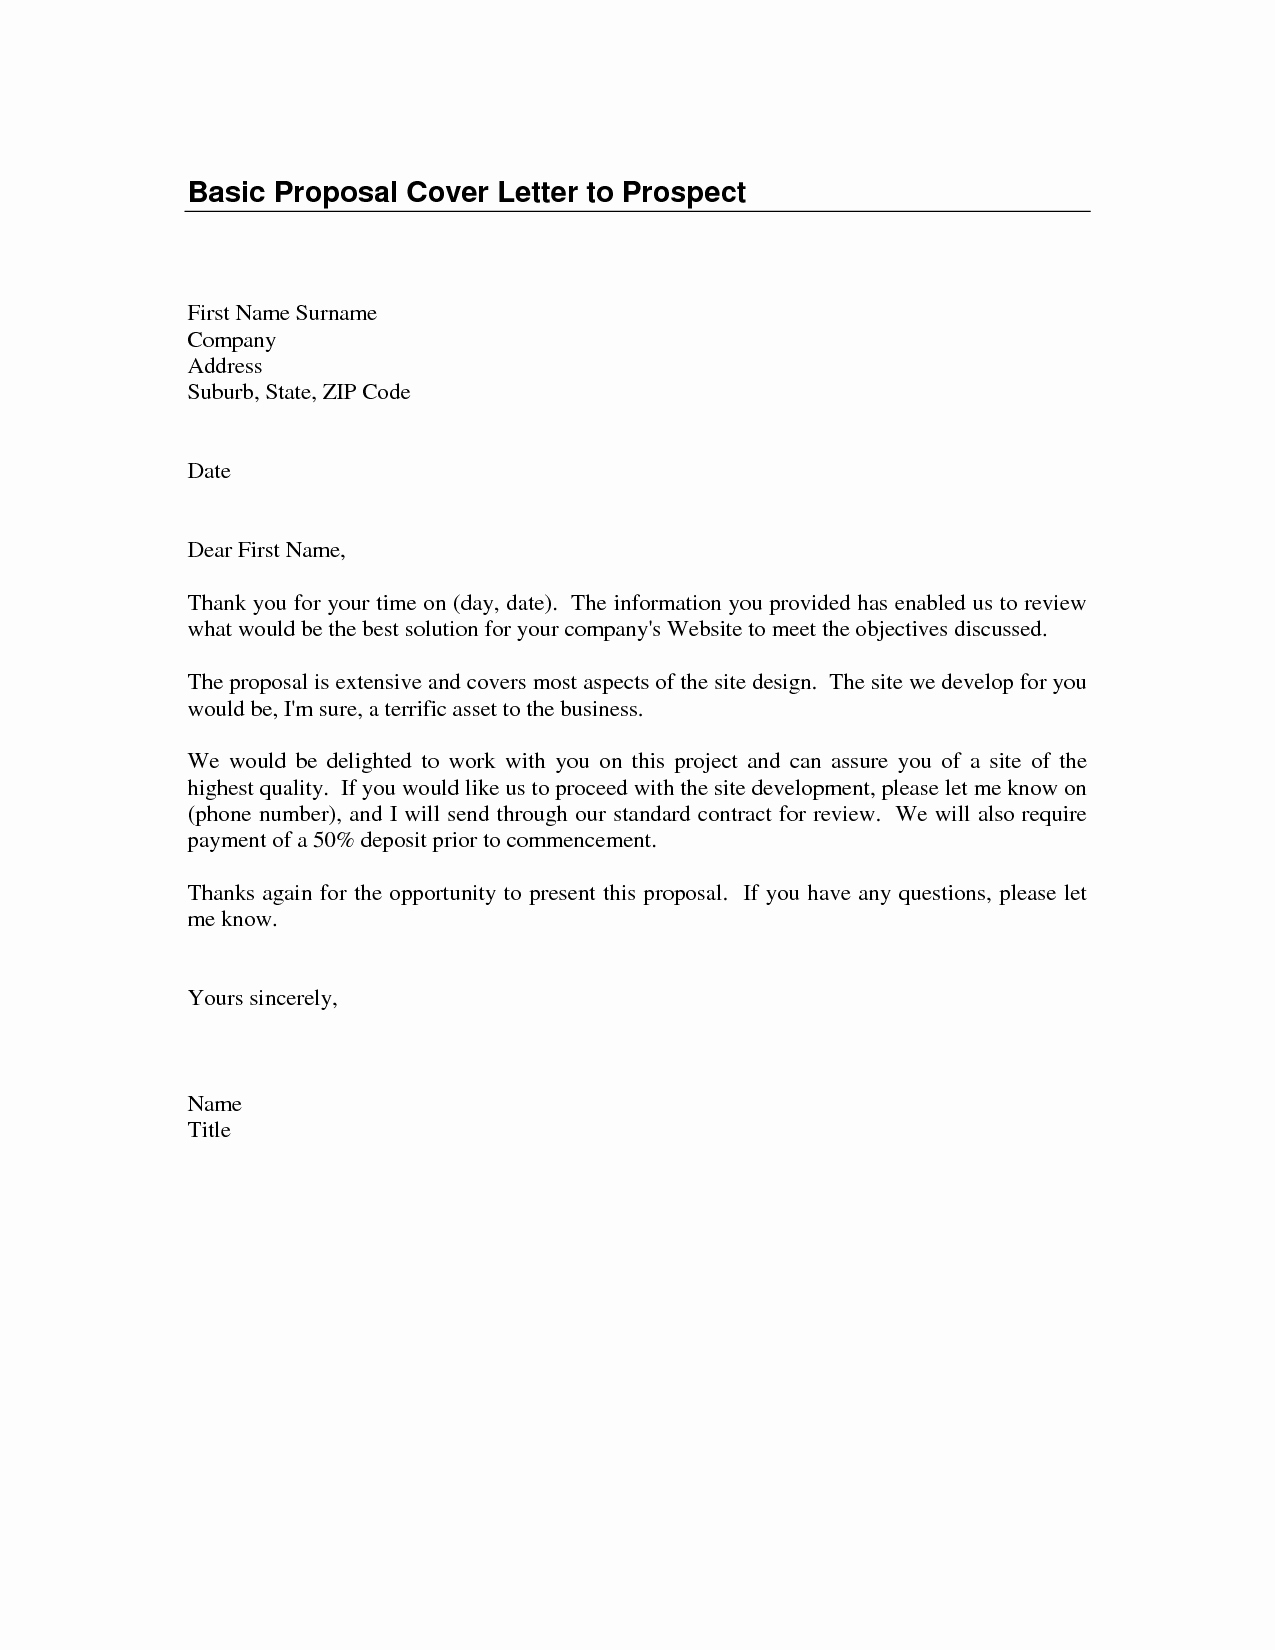 Cover Letters Template  Simple Cover Letter Template Word Inspirational Basic Cover Letter